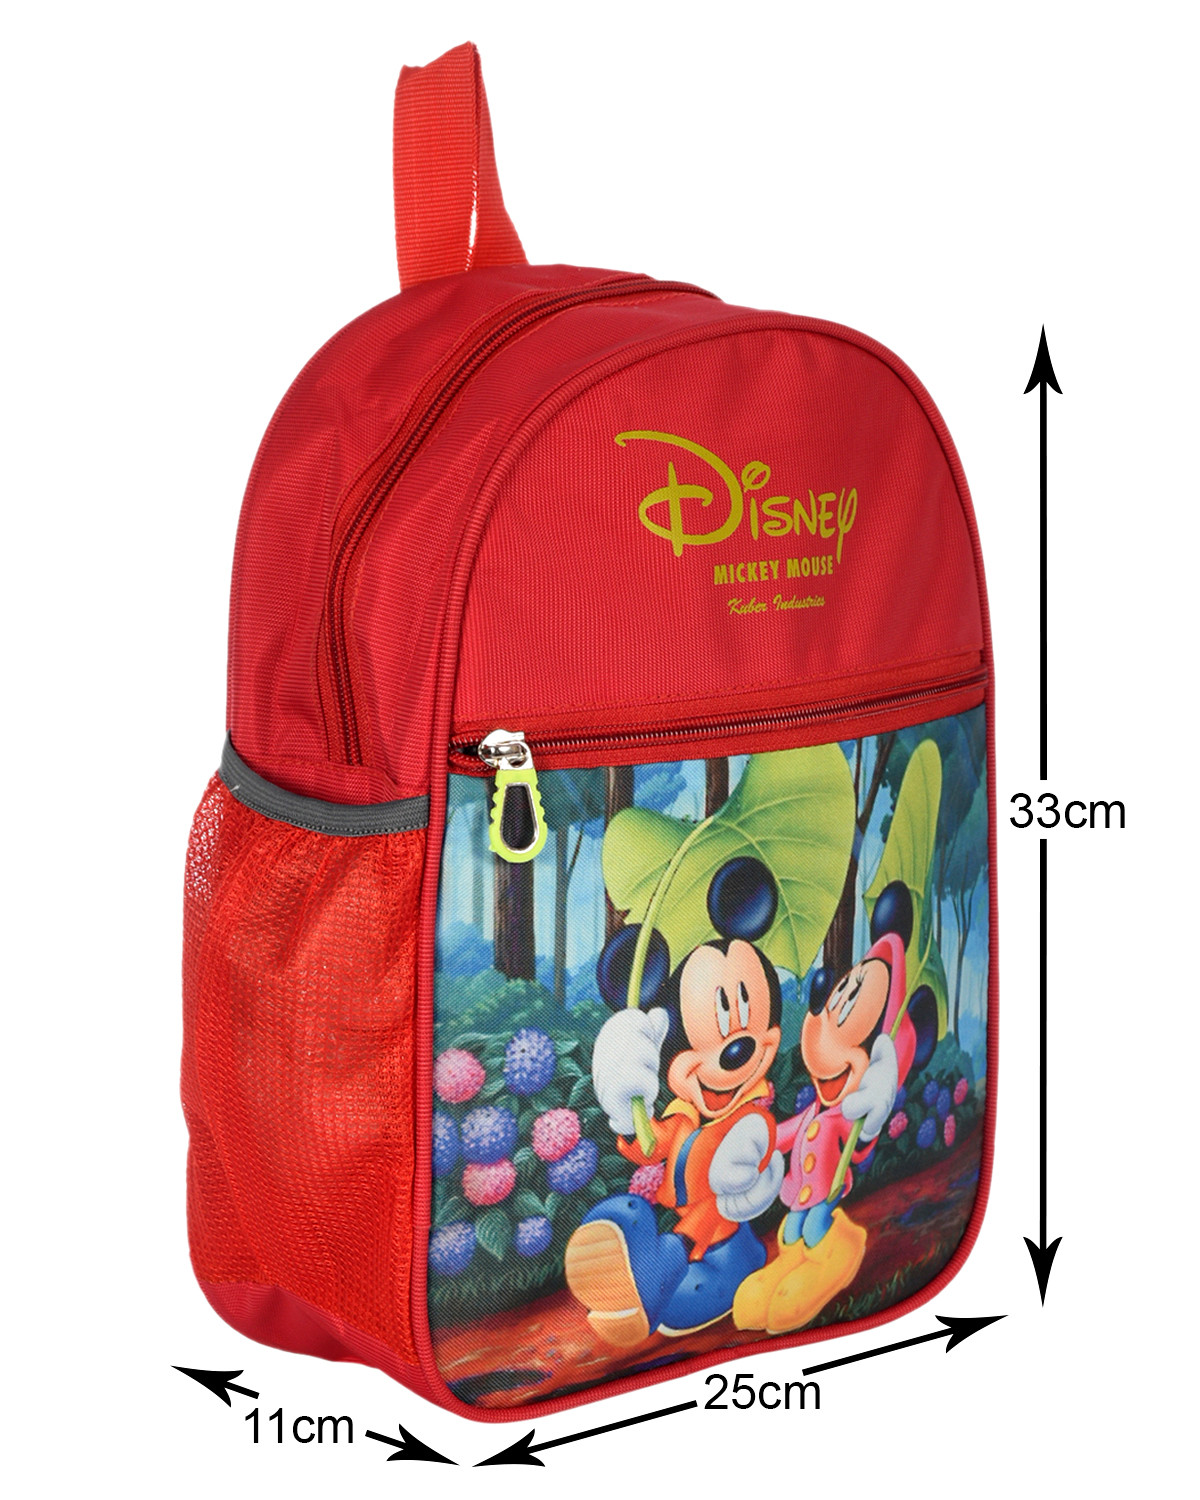 Kuber Industries Mickey & Minnie Print Kids Backpack Bag for School, Travel, Casual, Picnics (Red)